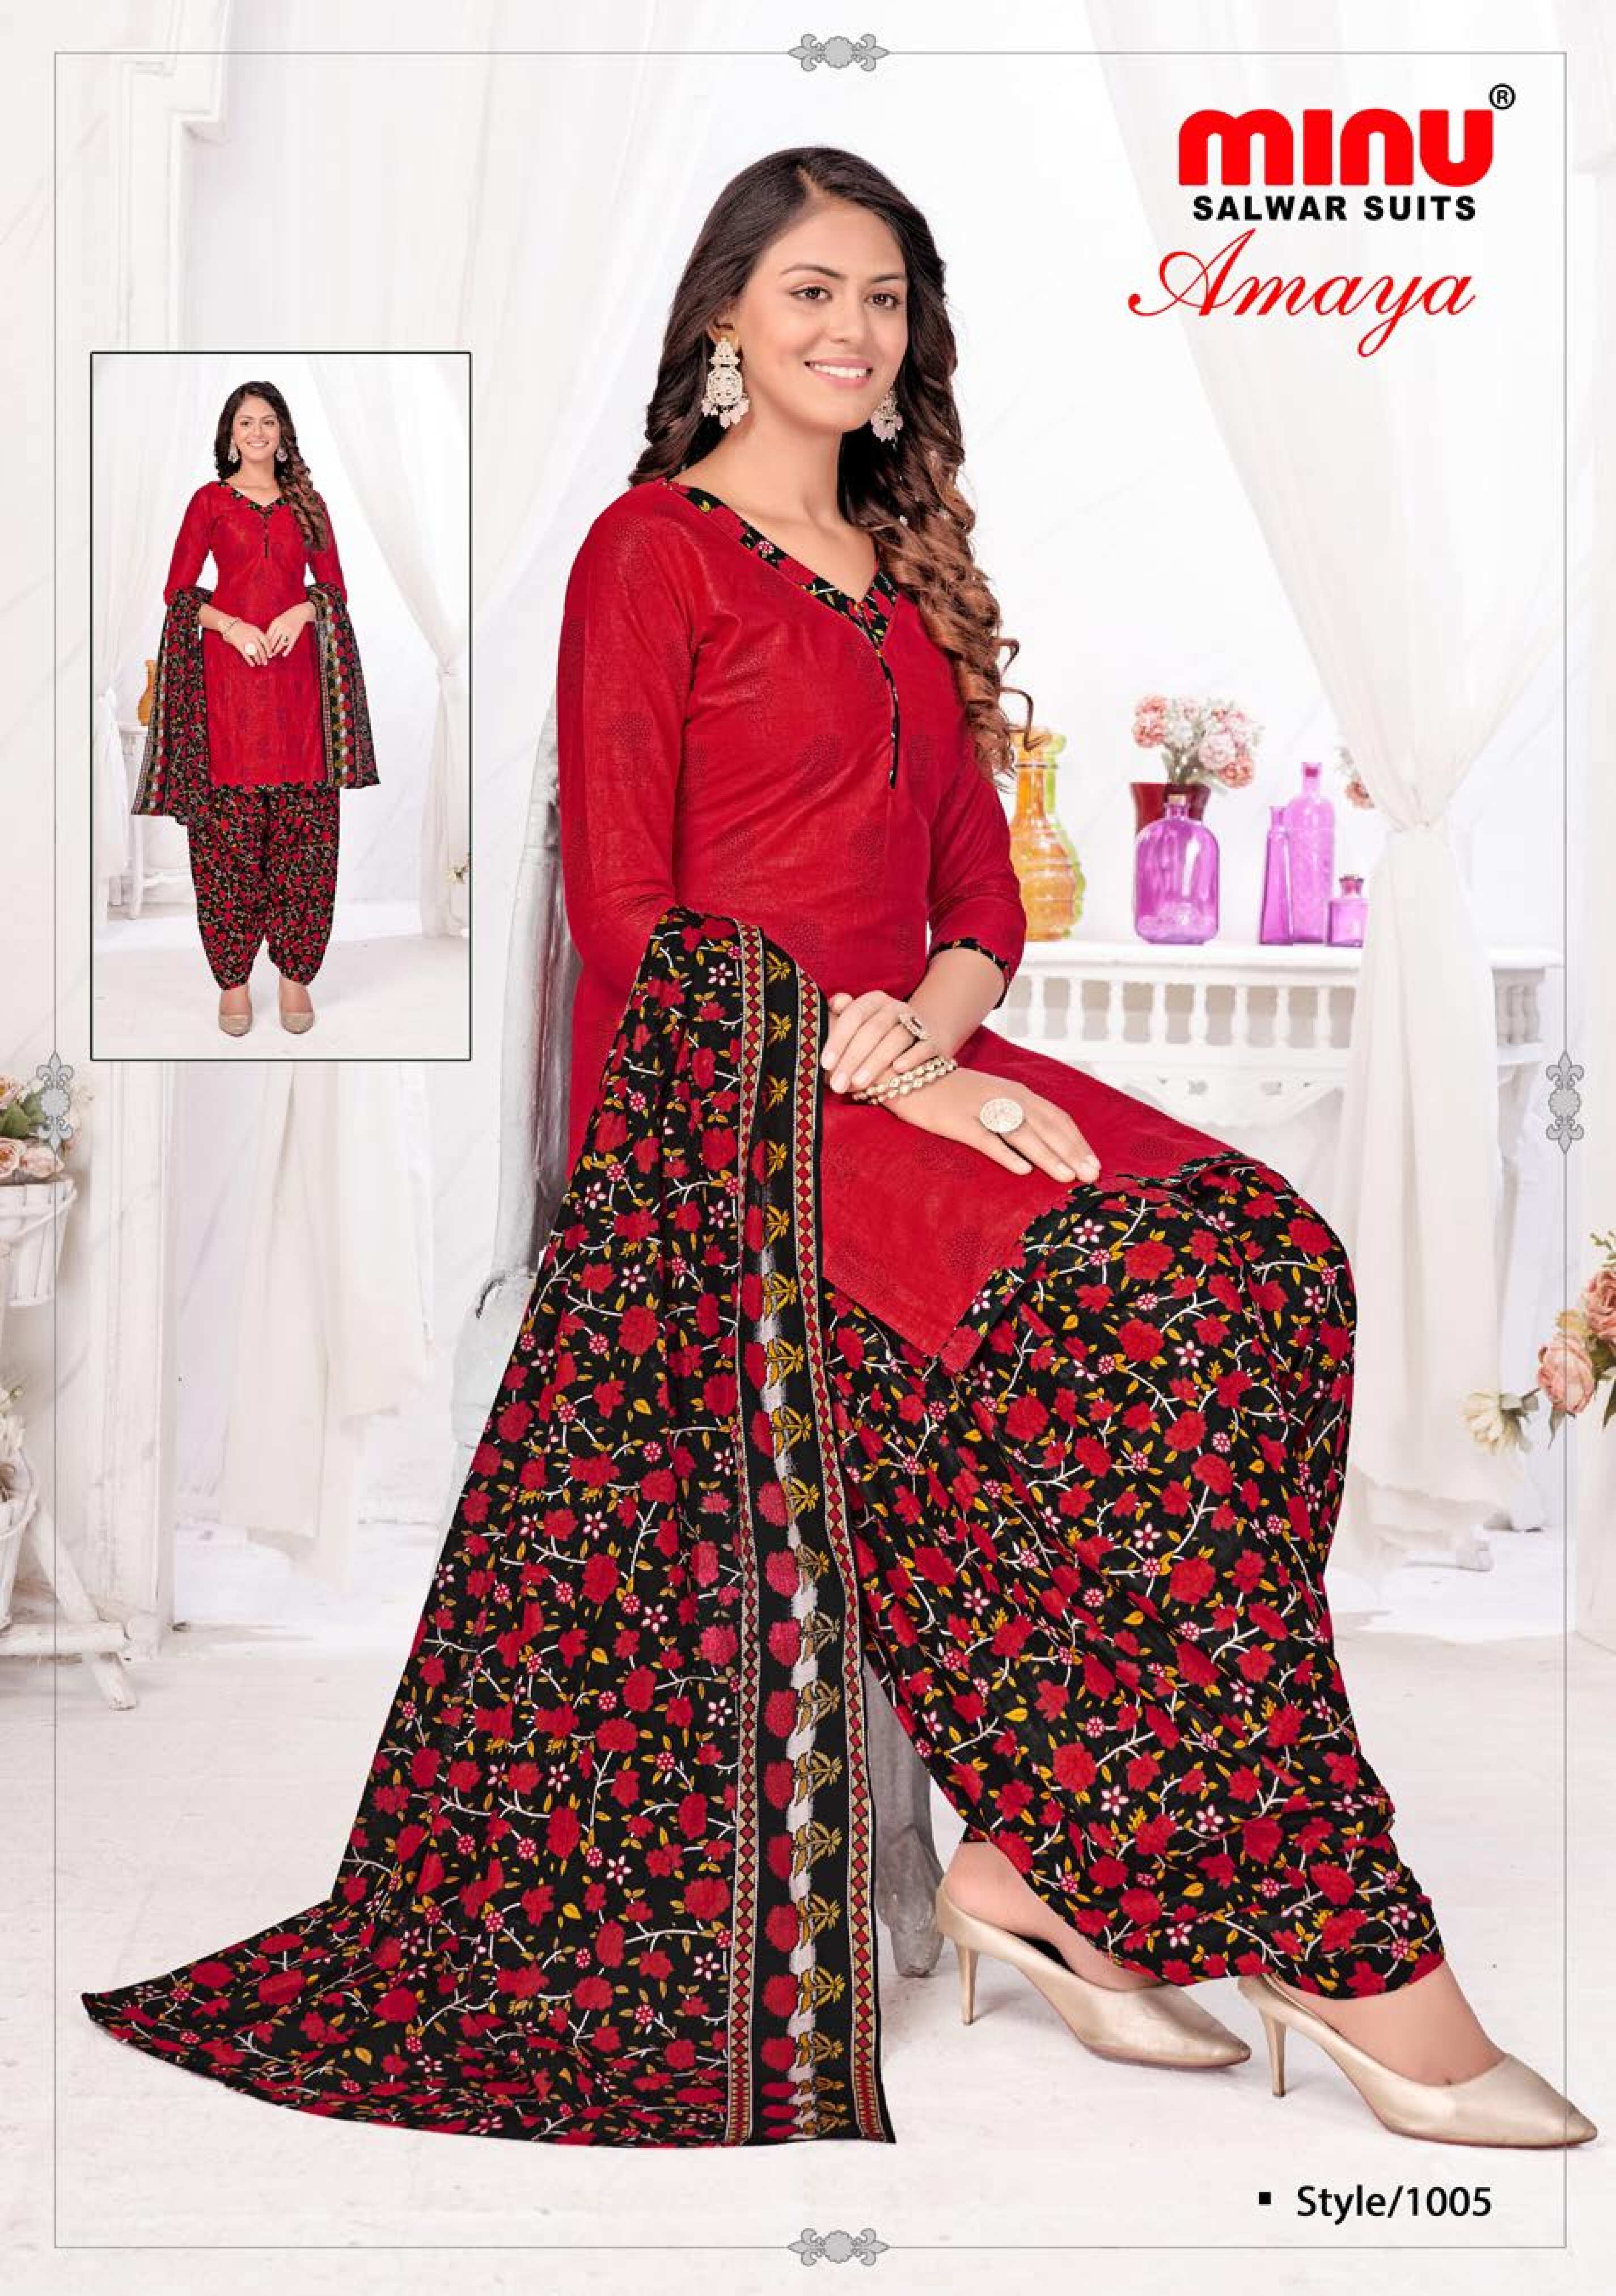 Red salwar suit from ladies suit manufacturer